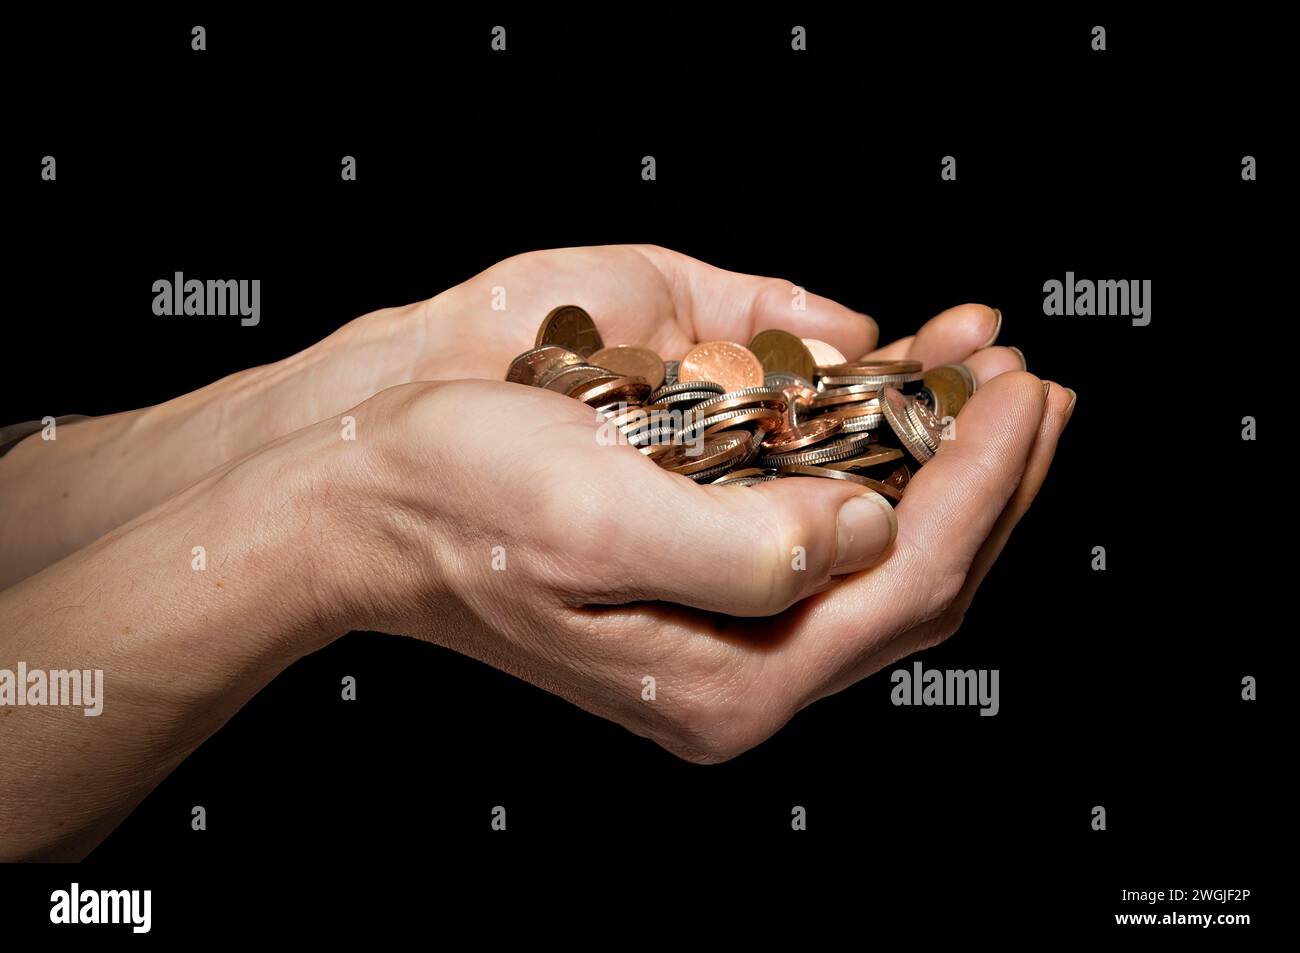 Caucasian male (42 yrs old) with hands held out full of money against a black background Stock Photo